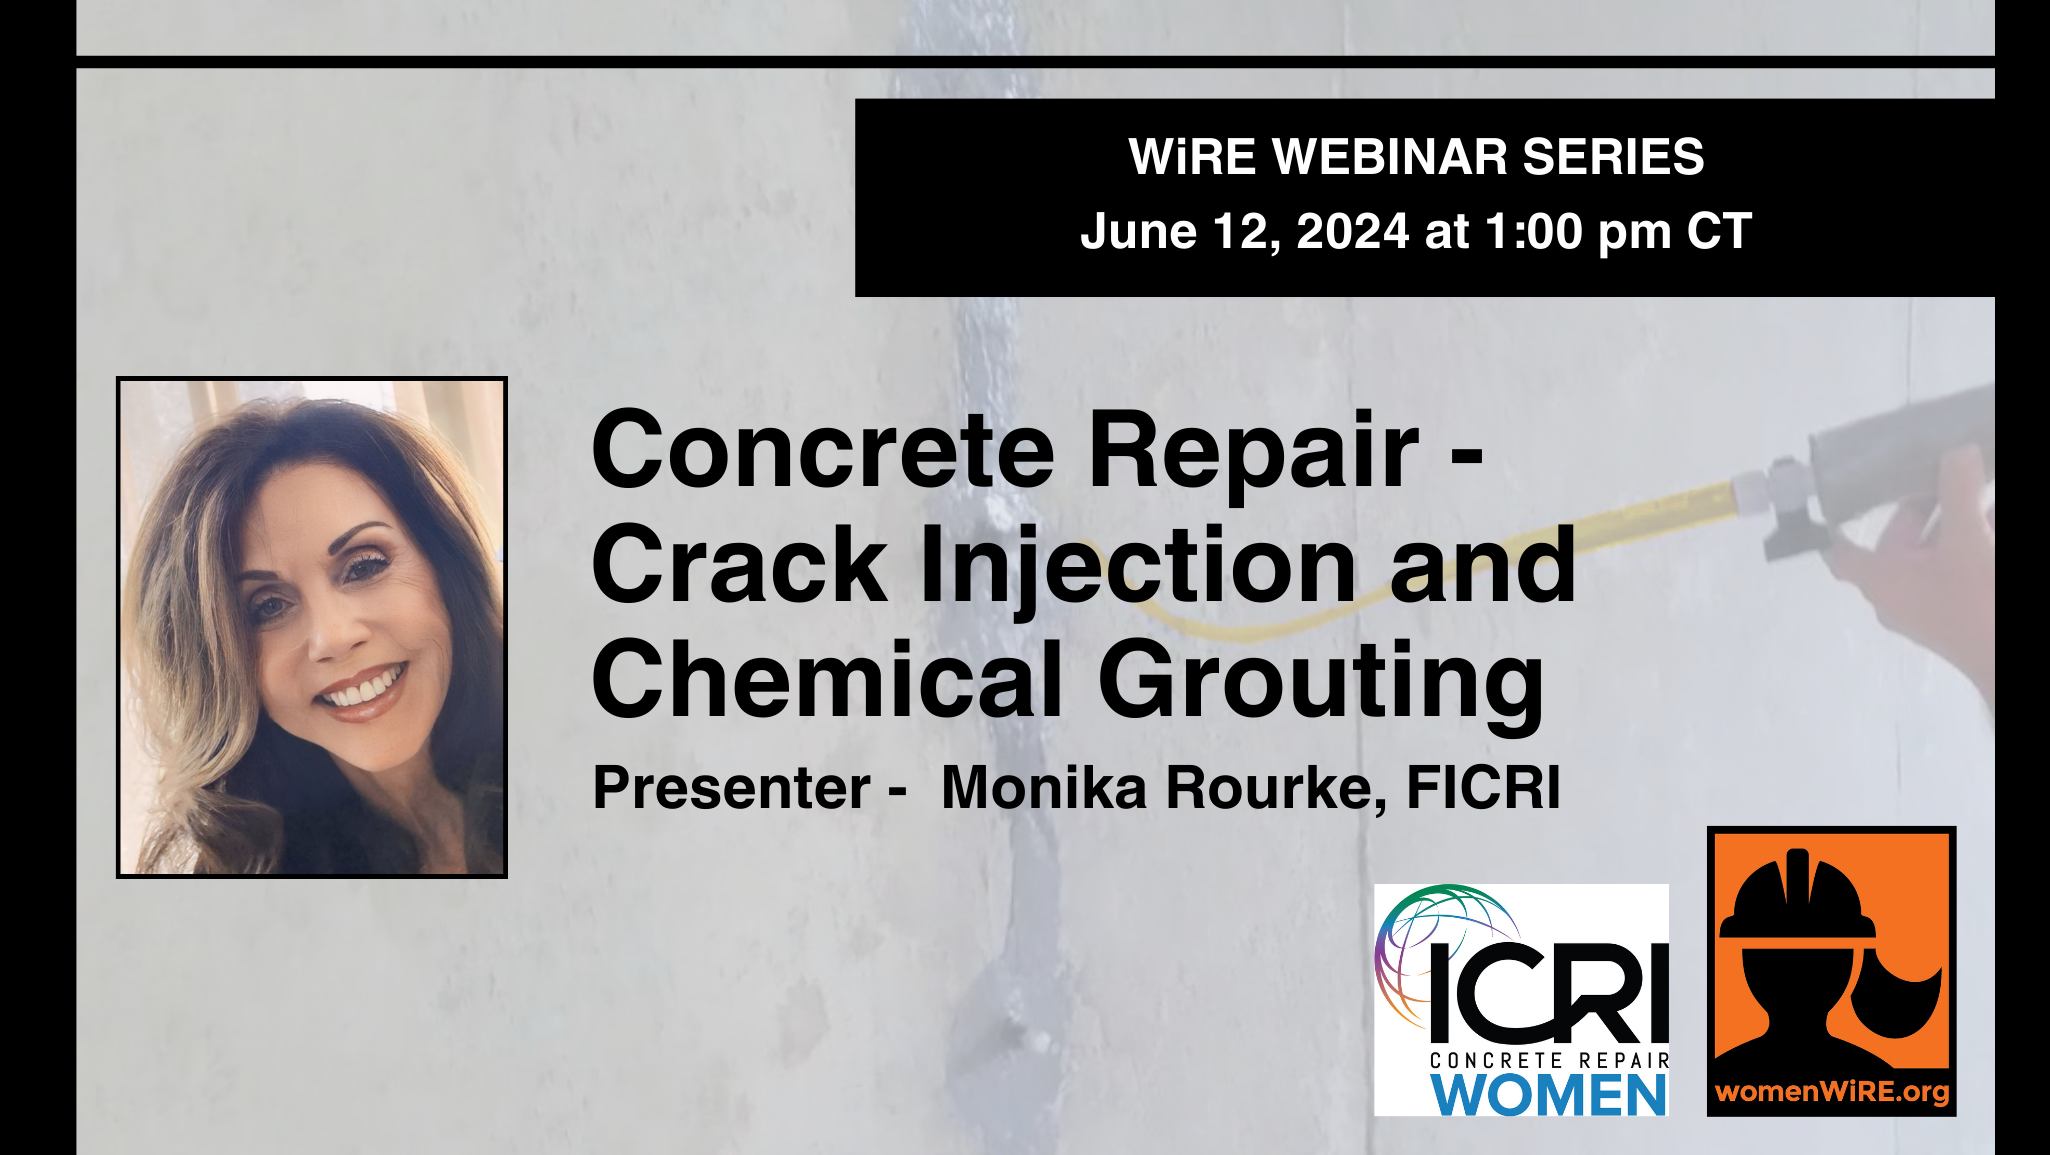 Concrete Repair, crack injection and chemical grouting